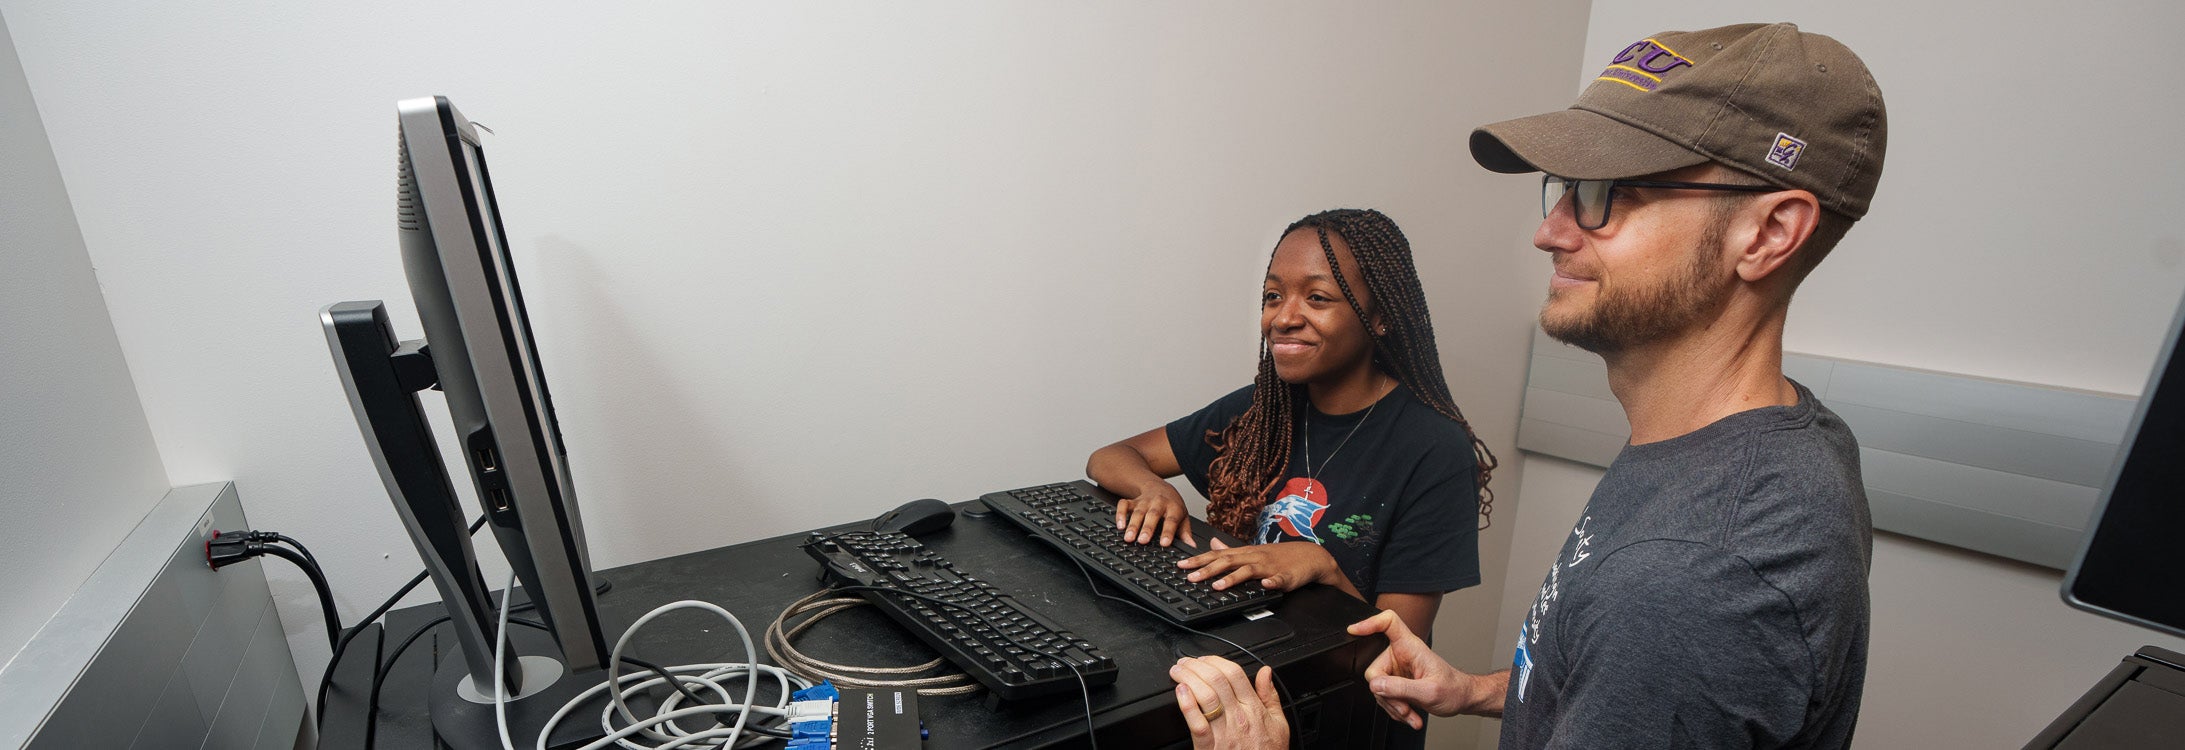 Dr. Michael Brewer and Hannah Pankey examine data pertaining to spider venom protein sequences. Brewer is leading Pankey in the analysis as part of the GlaxoSmithKline Foundation funding for the ECU STEM Summer Immersion program. (ECU photos by Cliff Hollis)